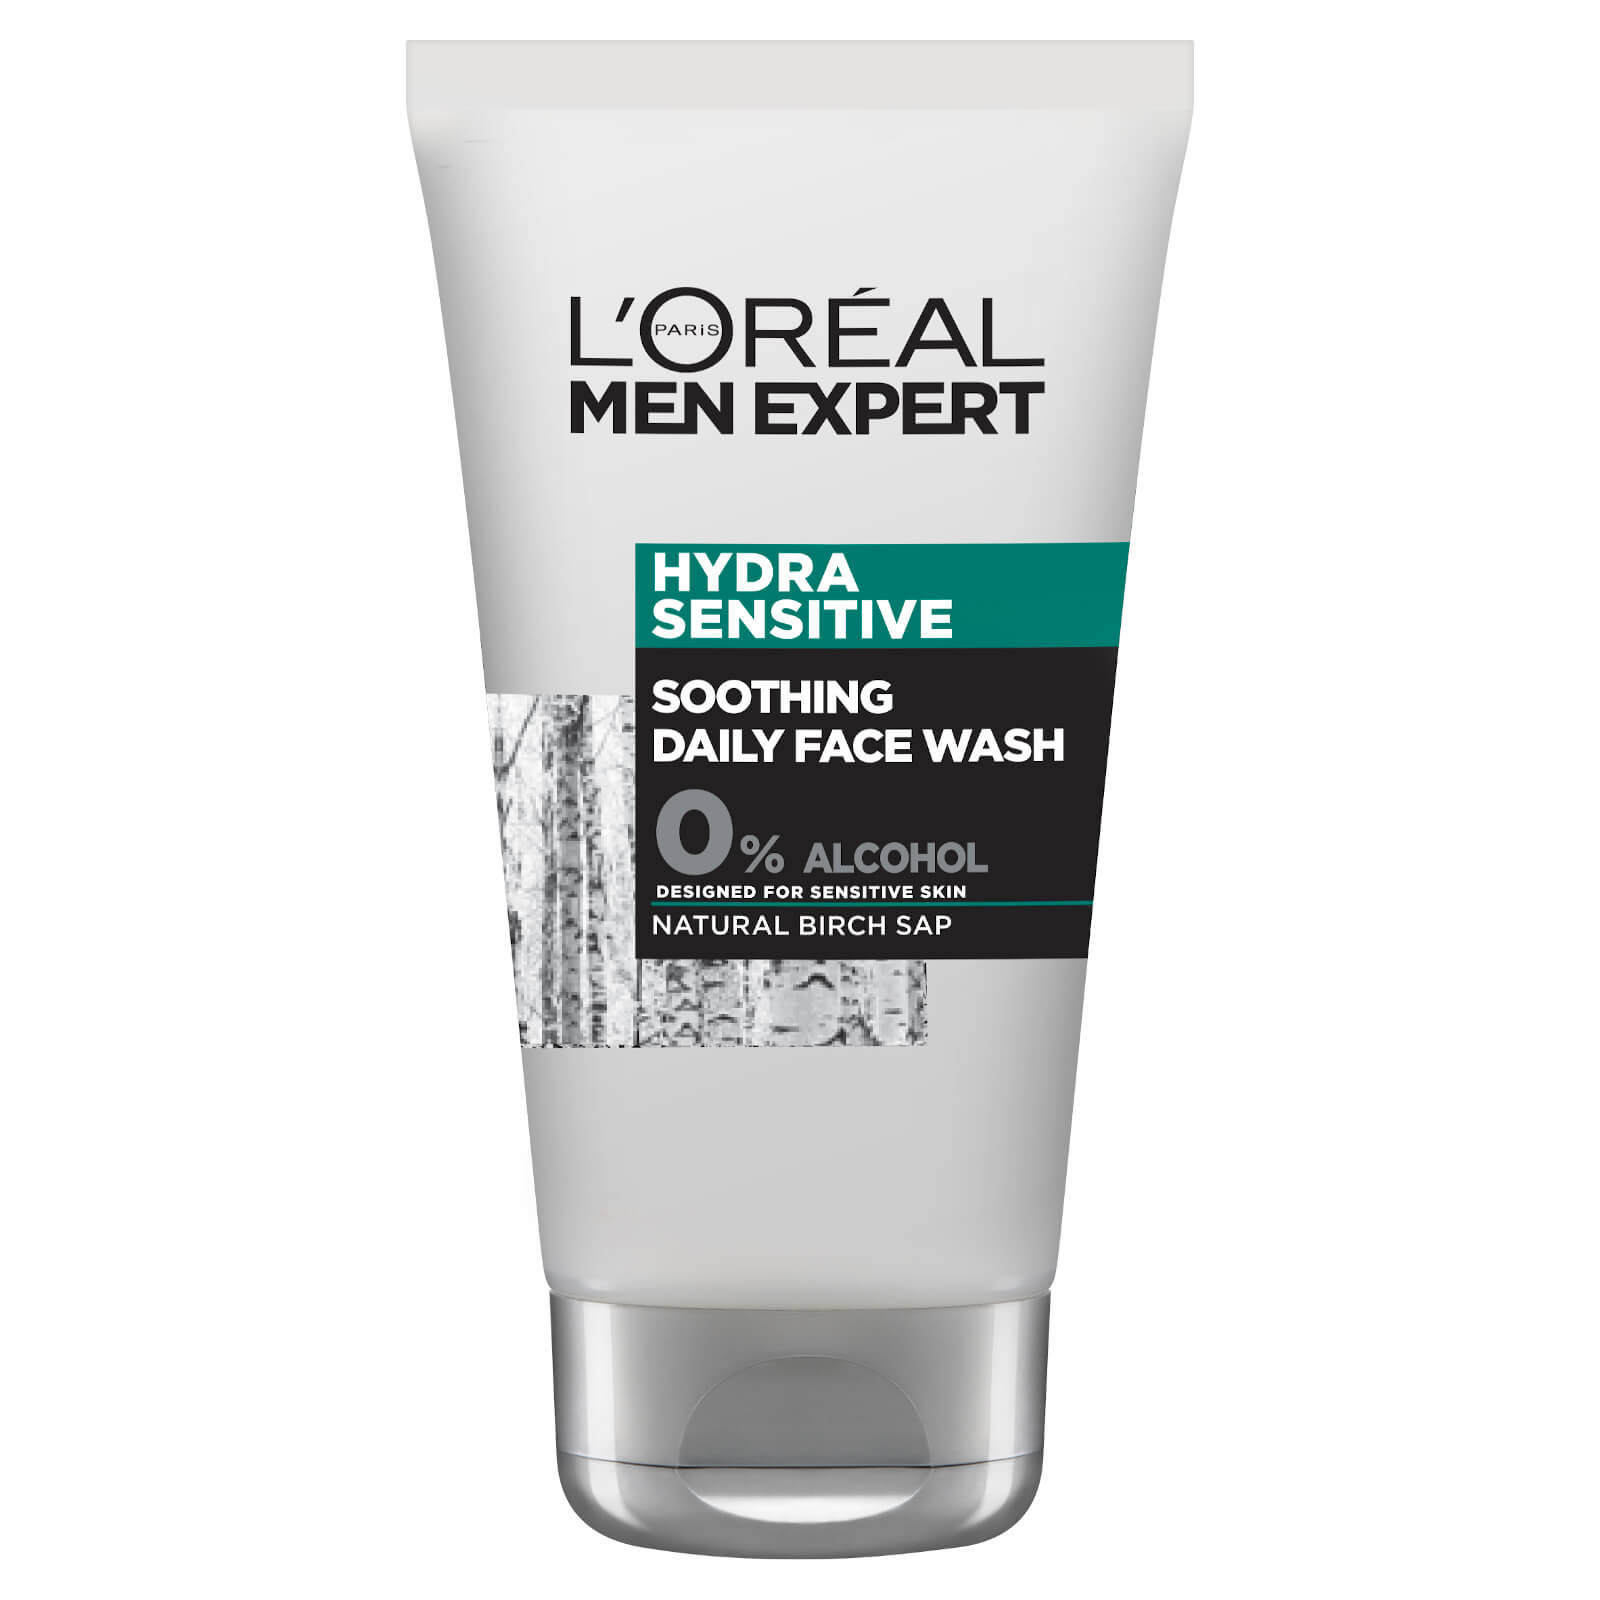 L'Oreal Men Expert Hydra Sensitive Soothing Daily Face Wash 100ml